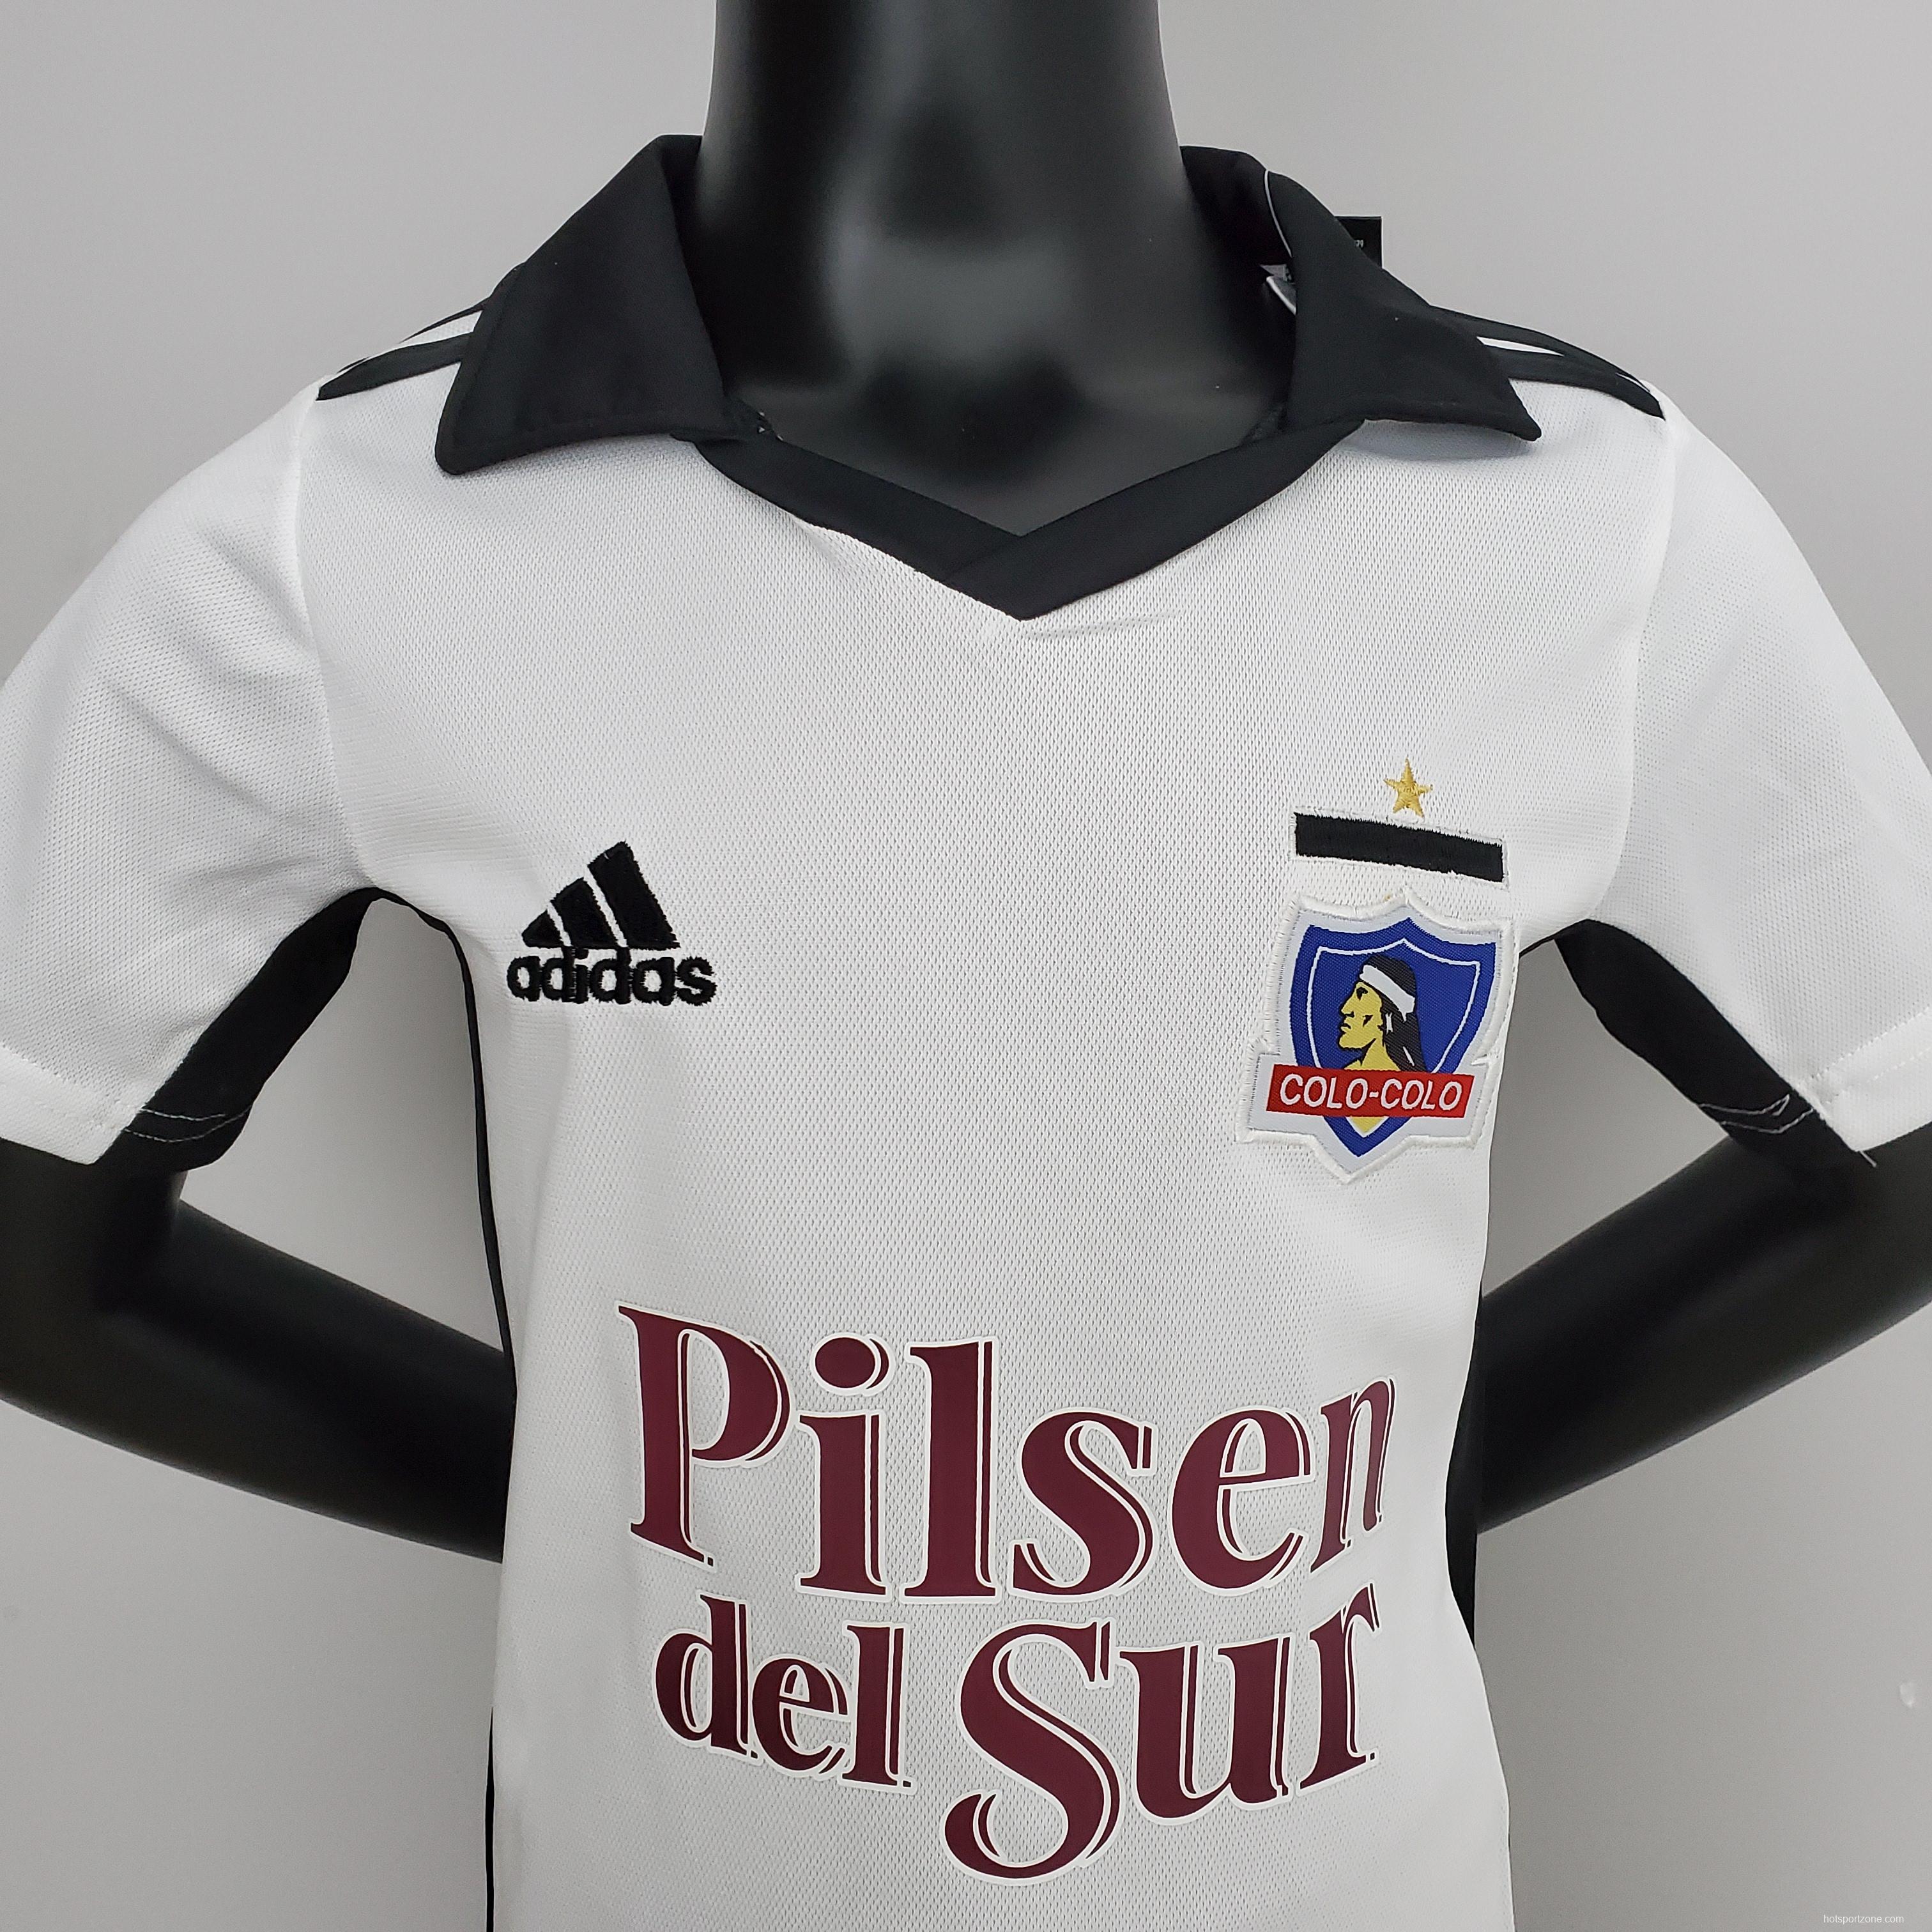 22/23 kids kit colo colo home Soccer Jersey